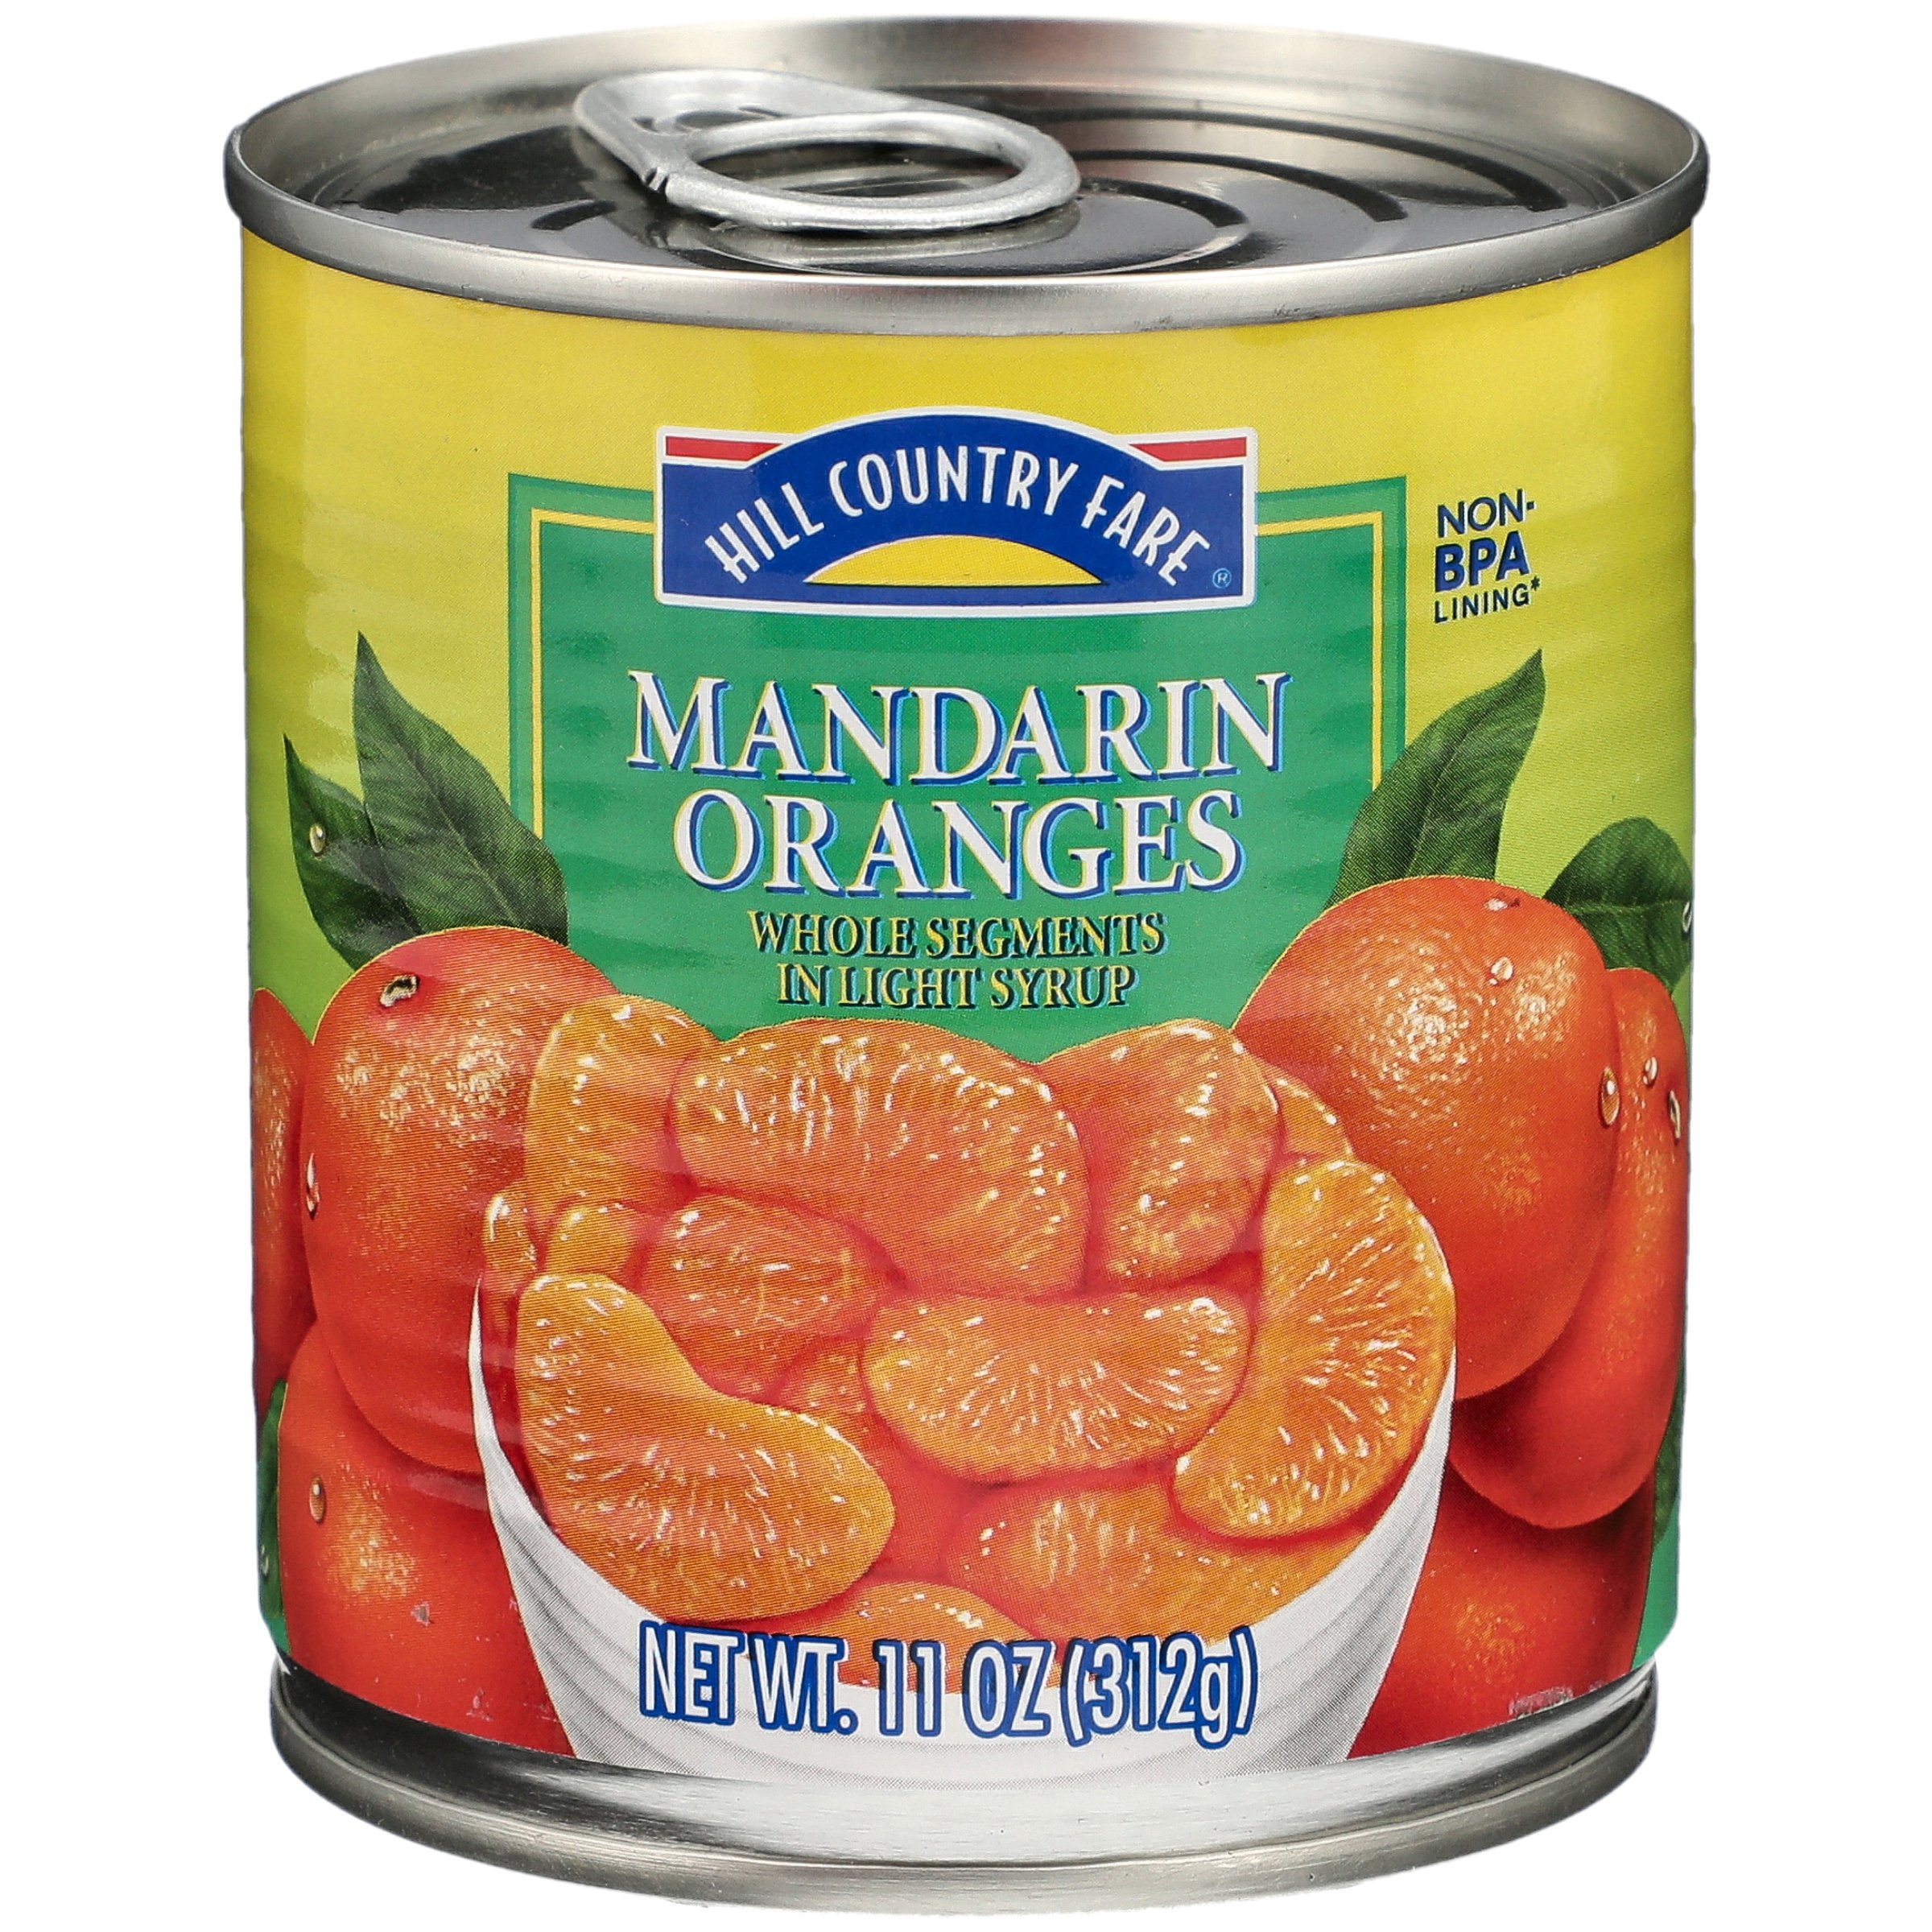 Whole Mandarin Oranges in Light Syrup